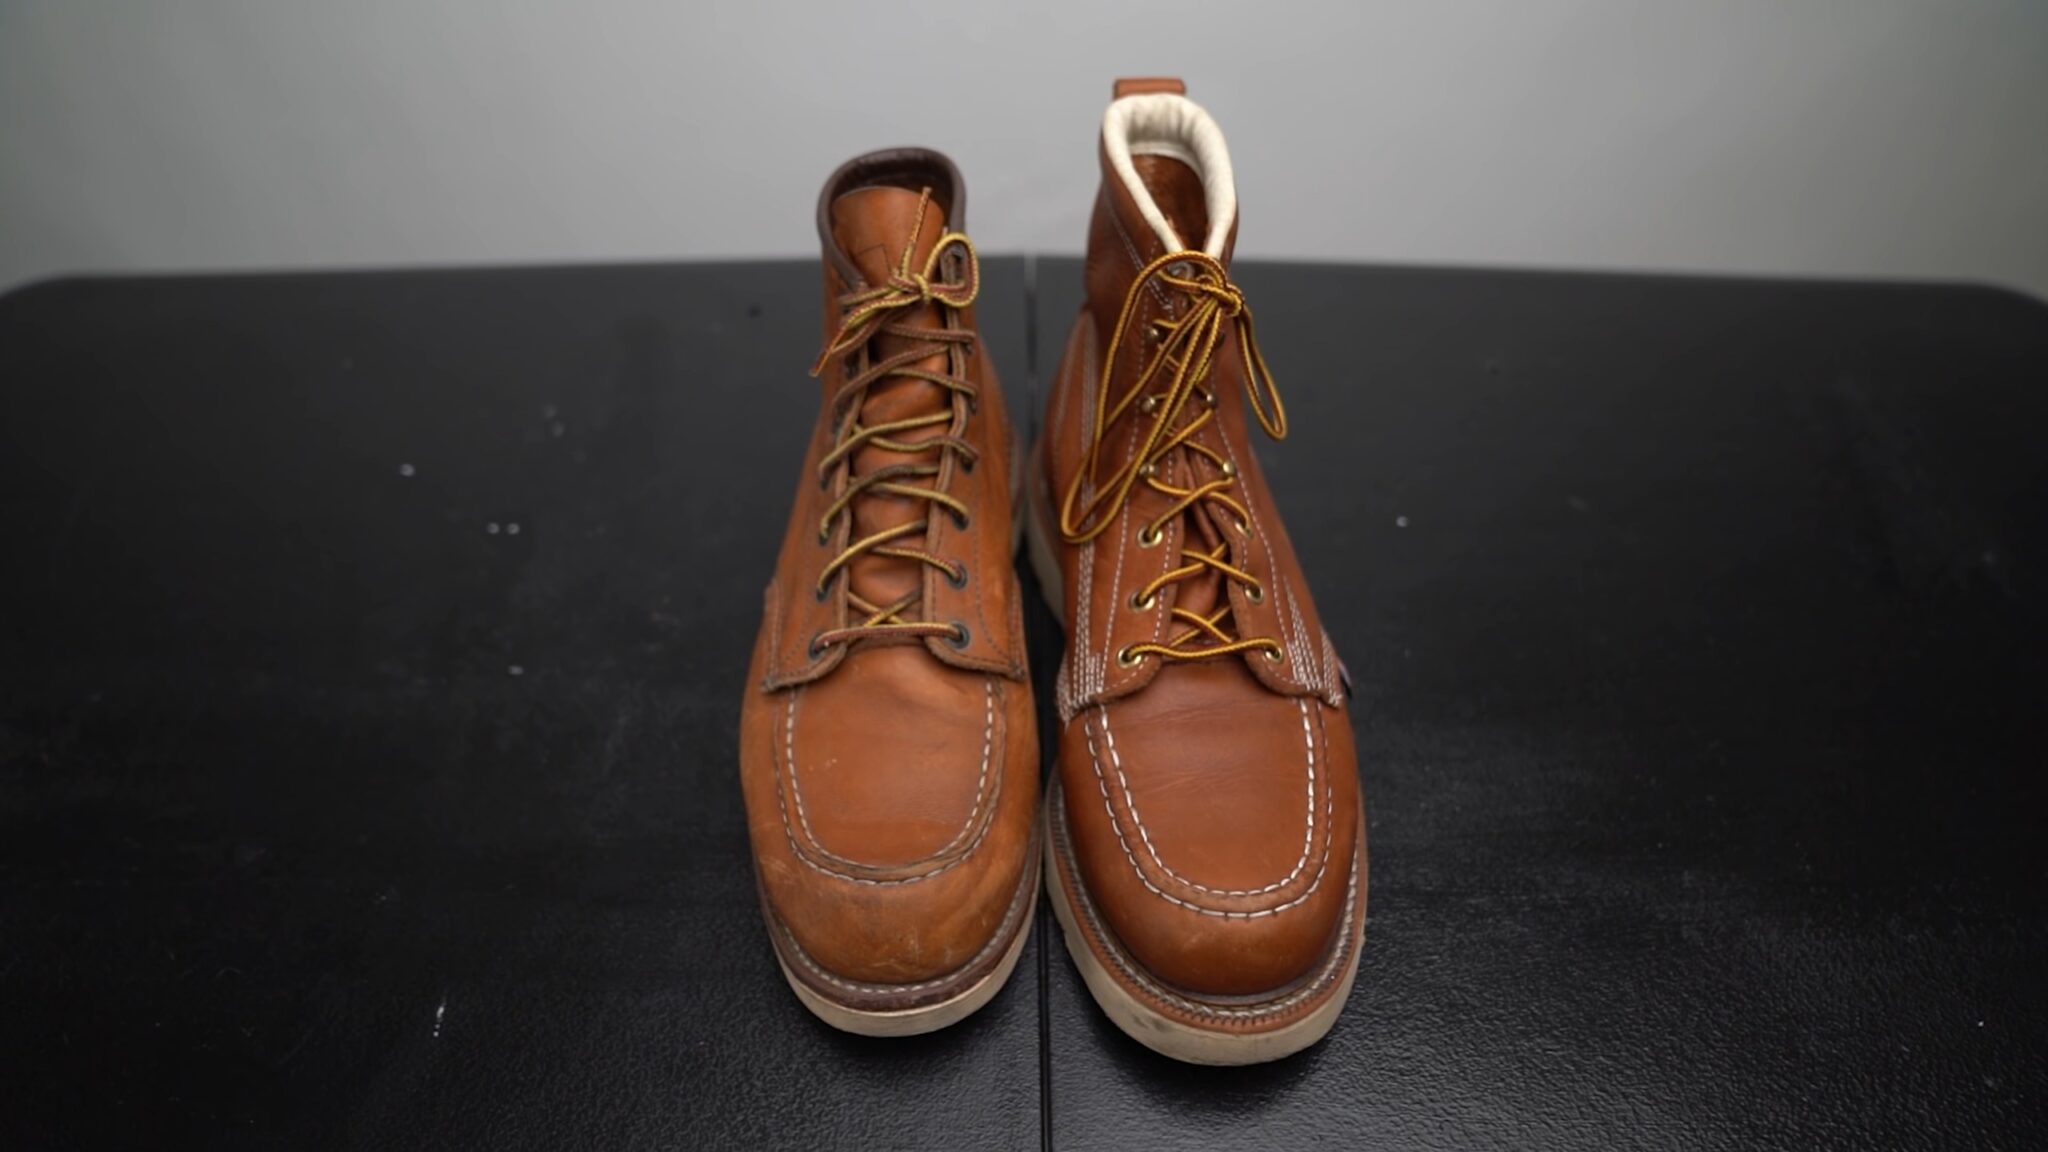 The Ultimate Moc Toe Boot Comparison: Red Wing vs Thorogood